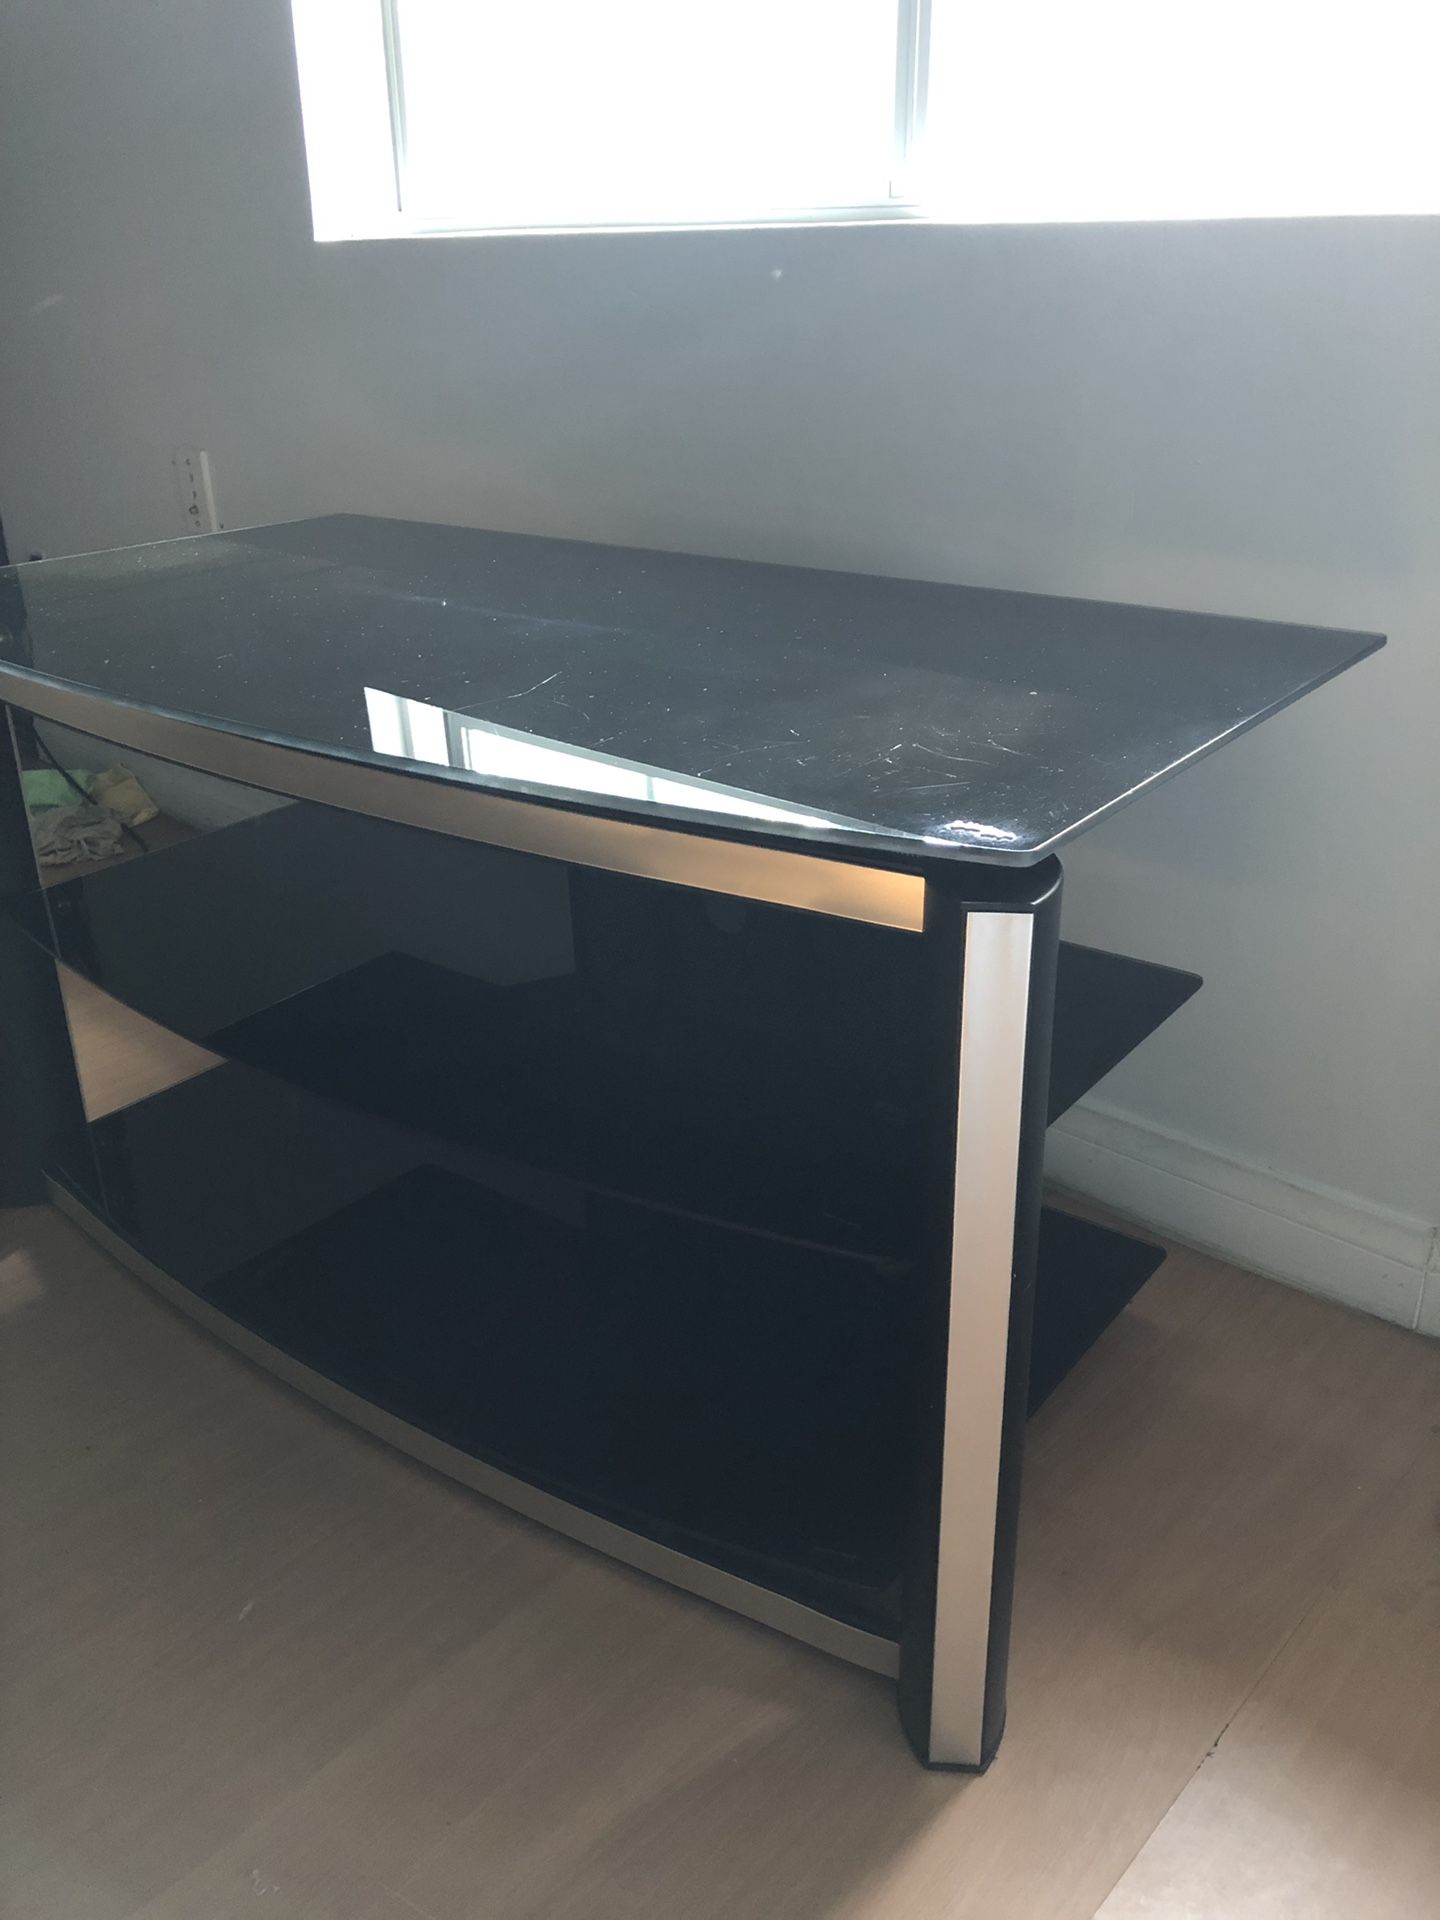 Z-Line TV stand